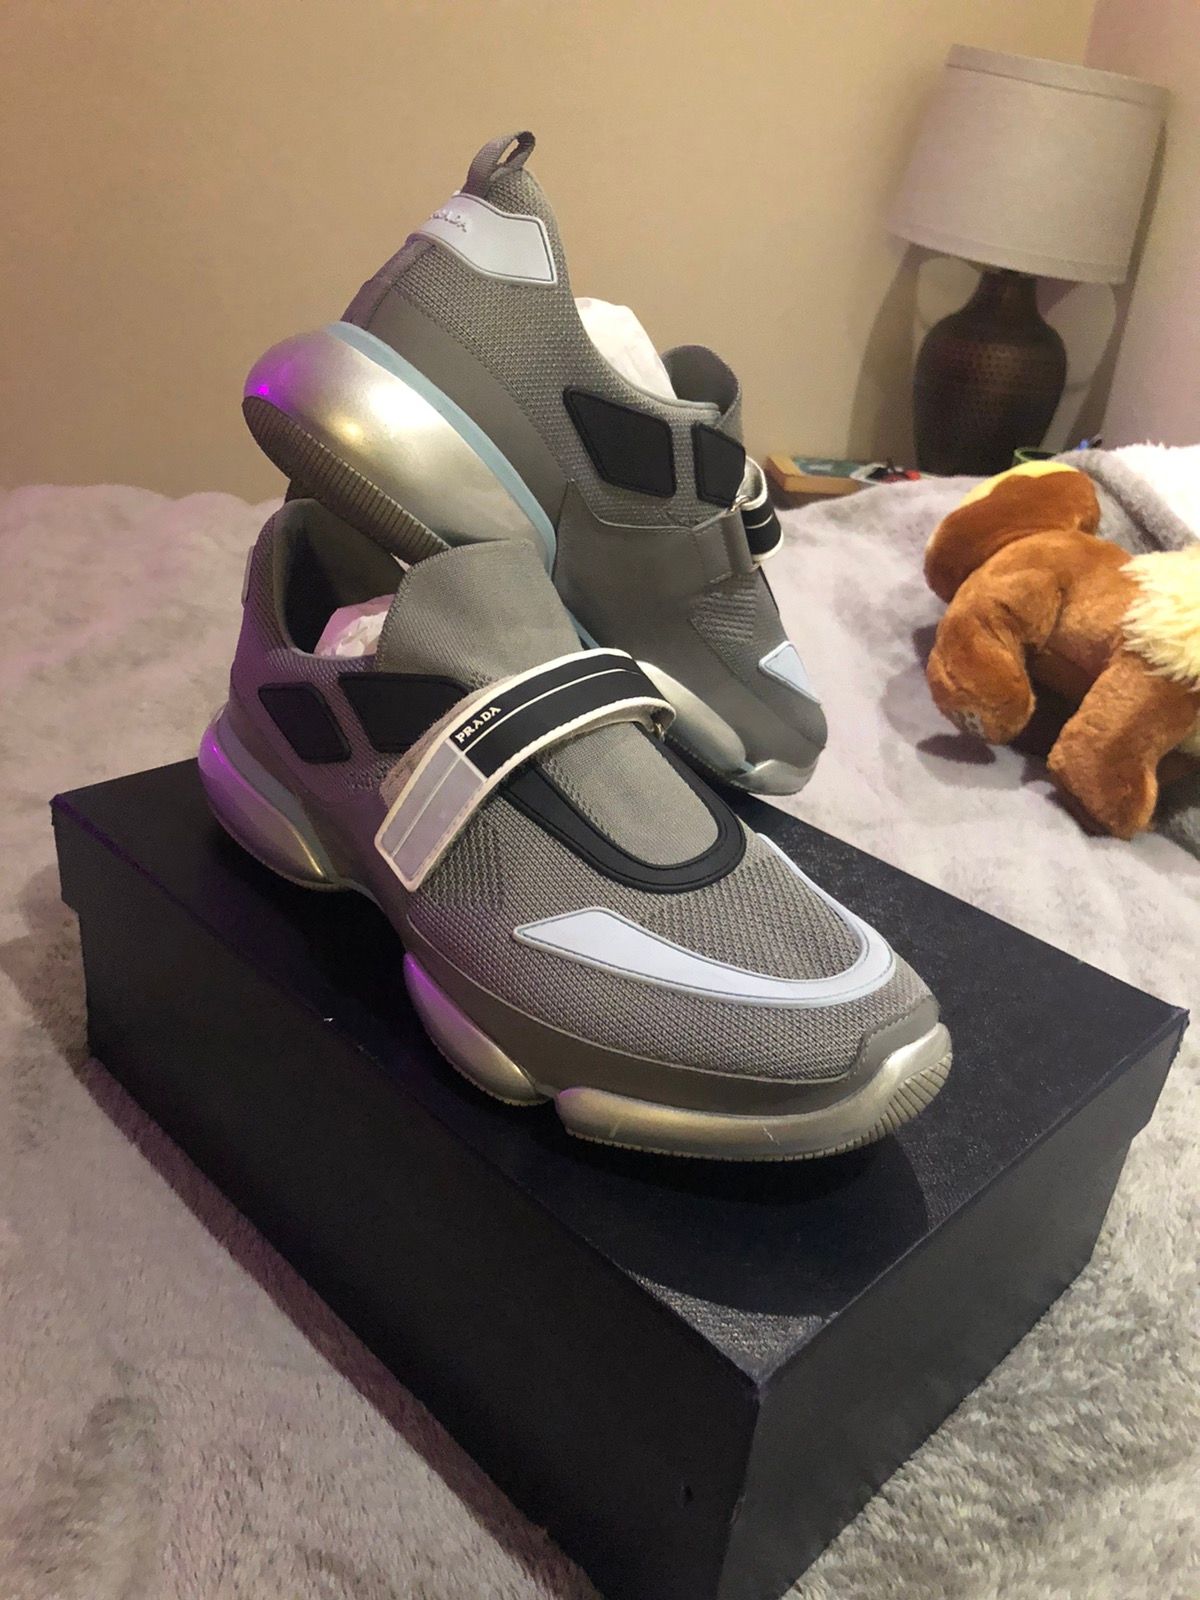 Prada Cloudbust Shoes in Null, Men's (Size 12) Product Image